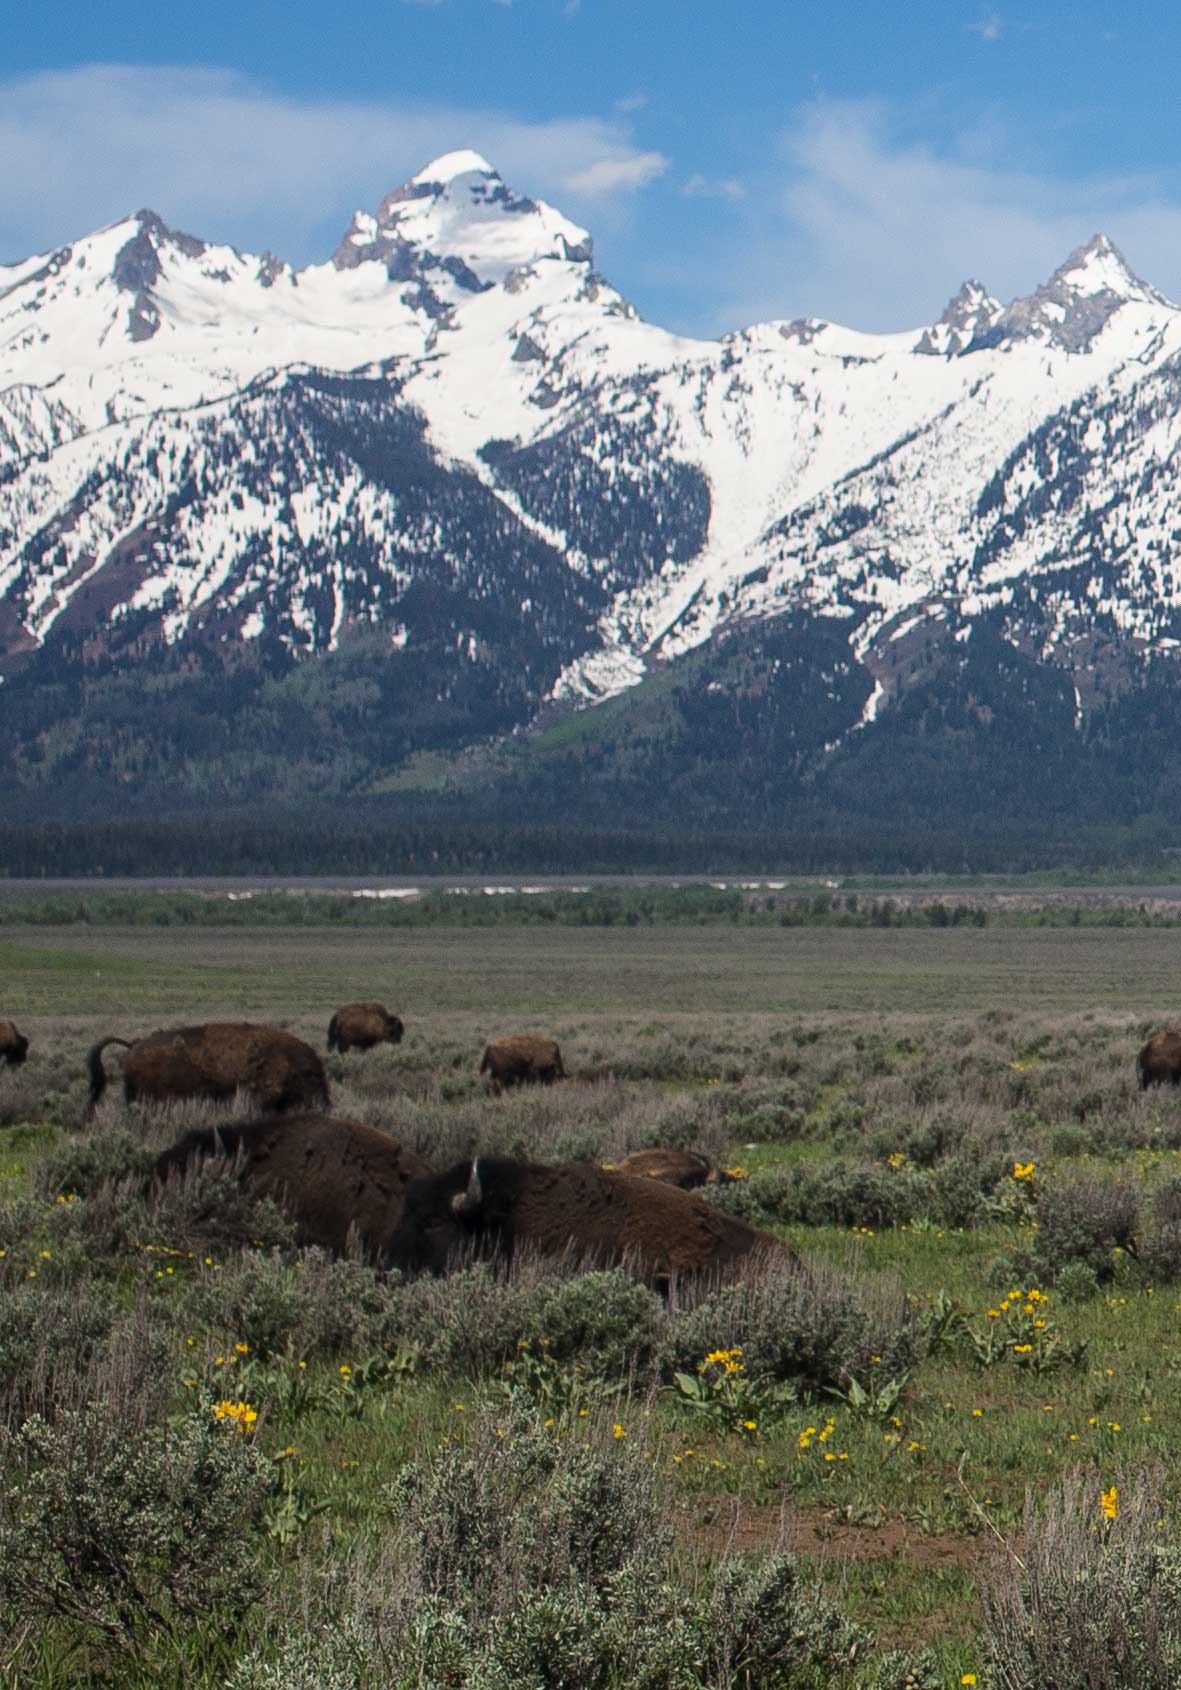 bison with snow capped mountain background